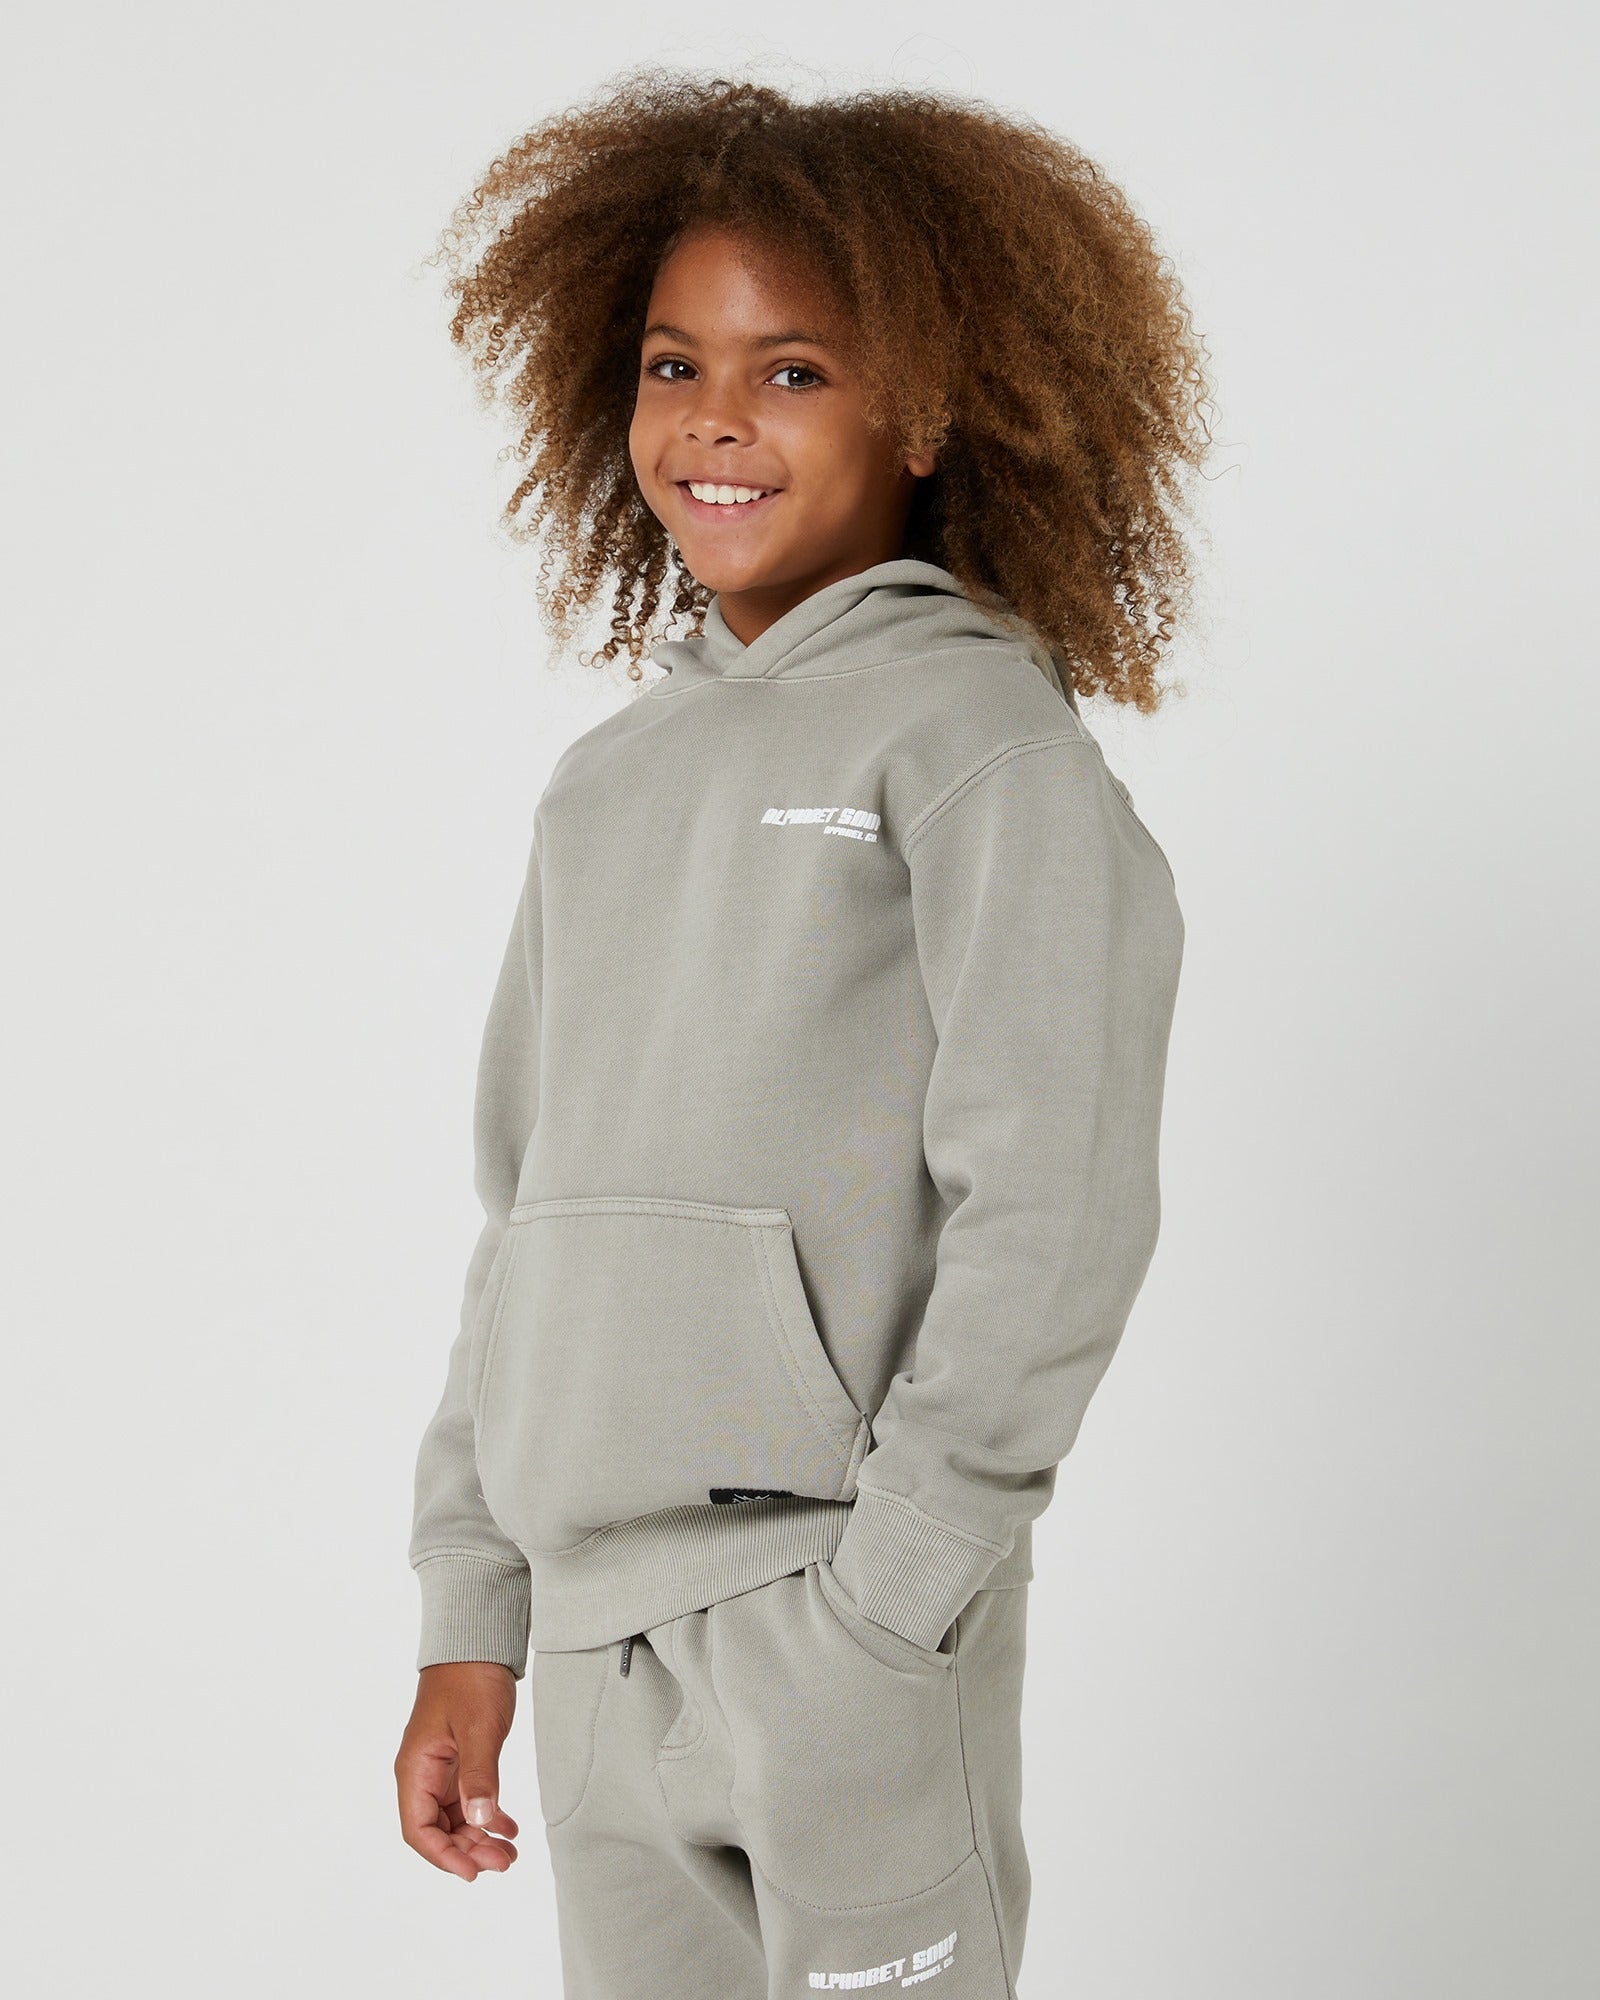 Vintage-inspired Kids Hoodie by Alphabet Soup! Heavy brushed back fleece for comfort & a boxy skate fit. Raised puff logo for playful touch. Perfect for skate-loving boys. Fixed hood & front pocket.